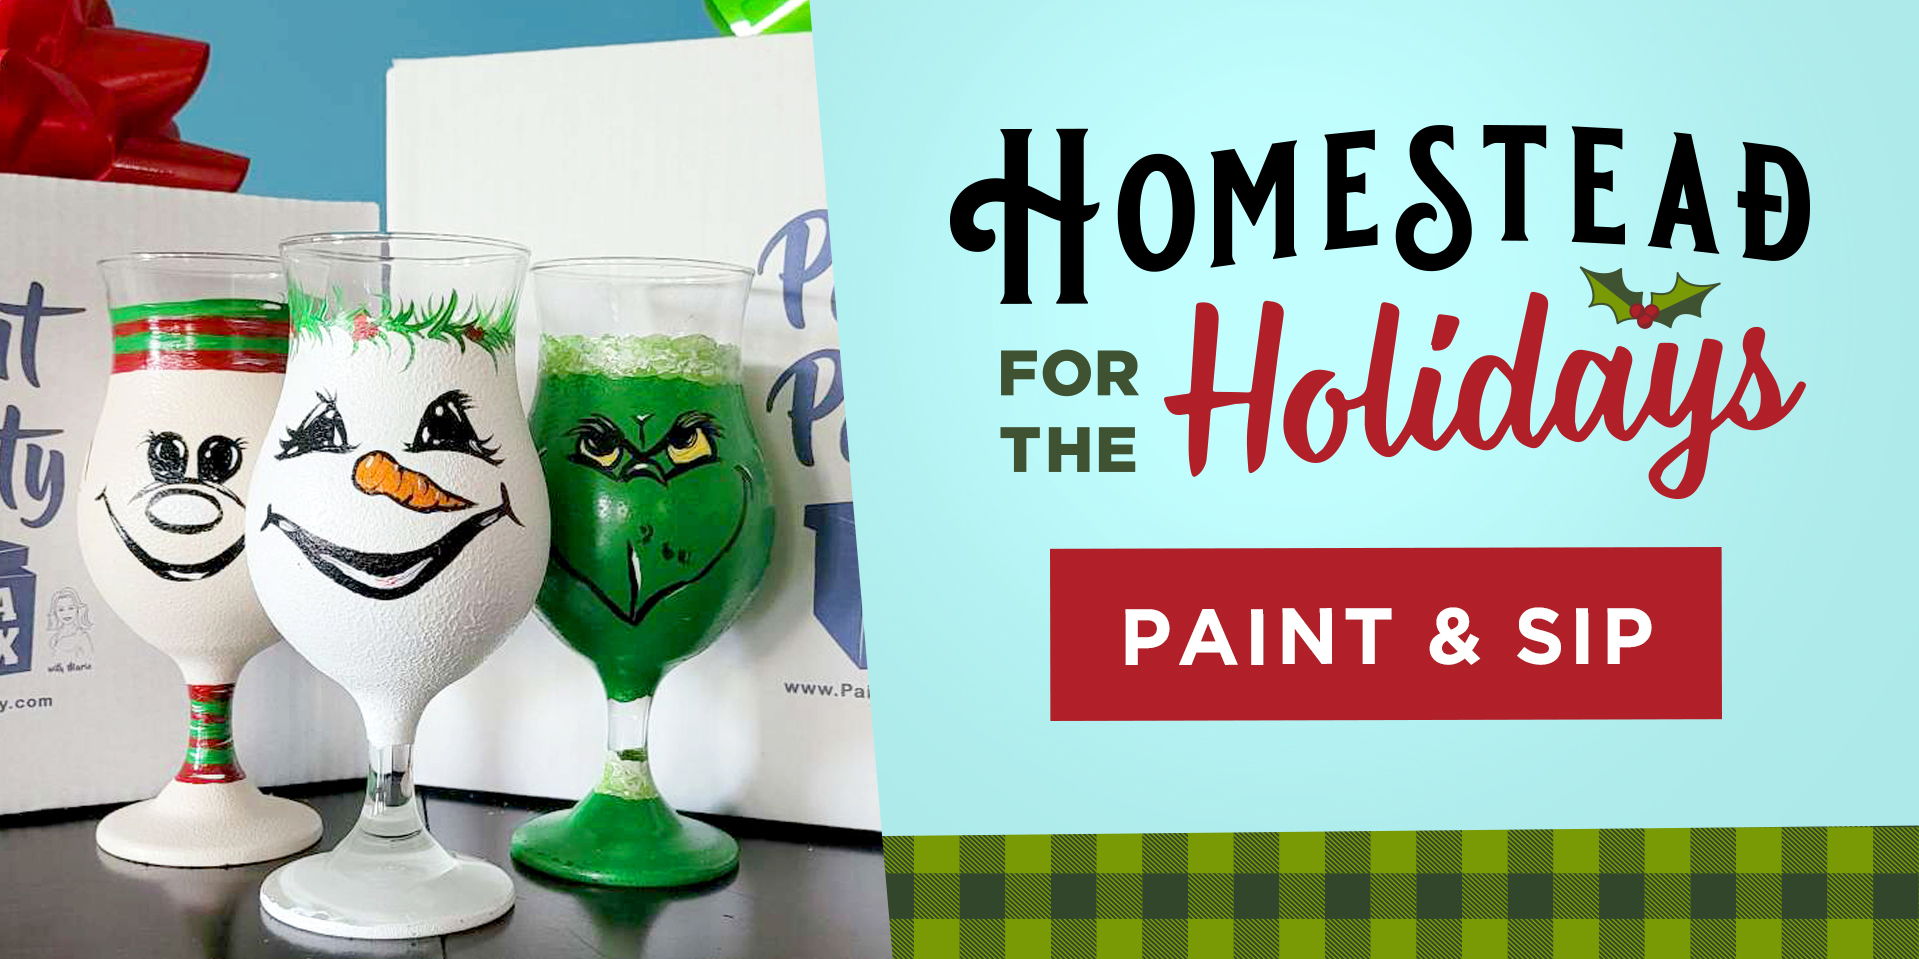 Homestead for the Holidays: Paint & Sip promotional image